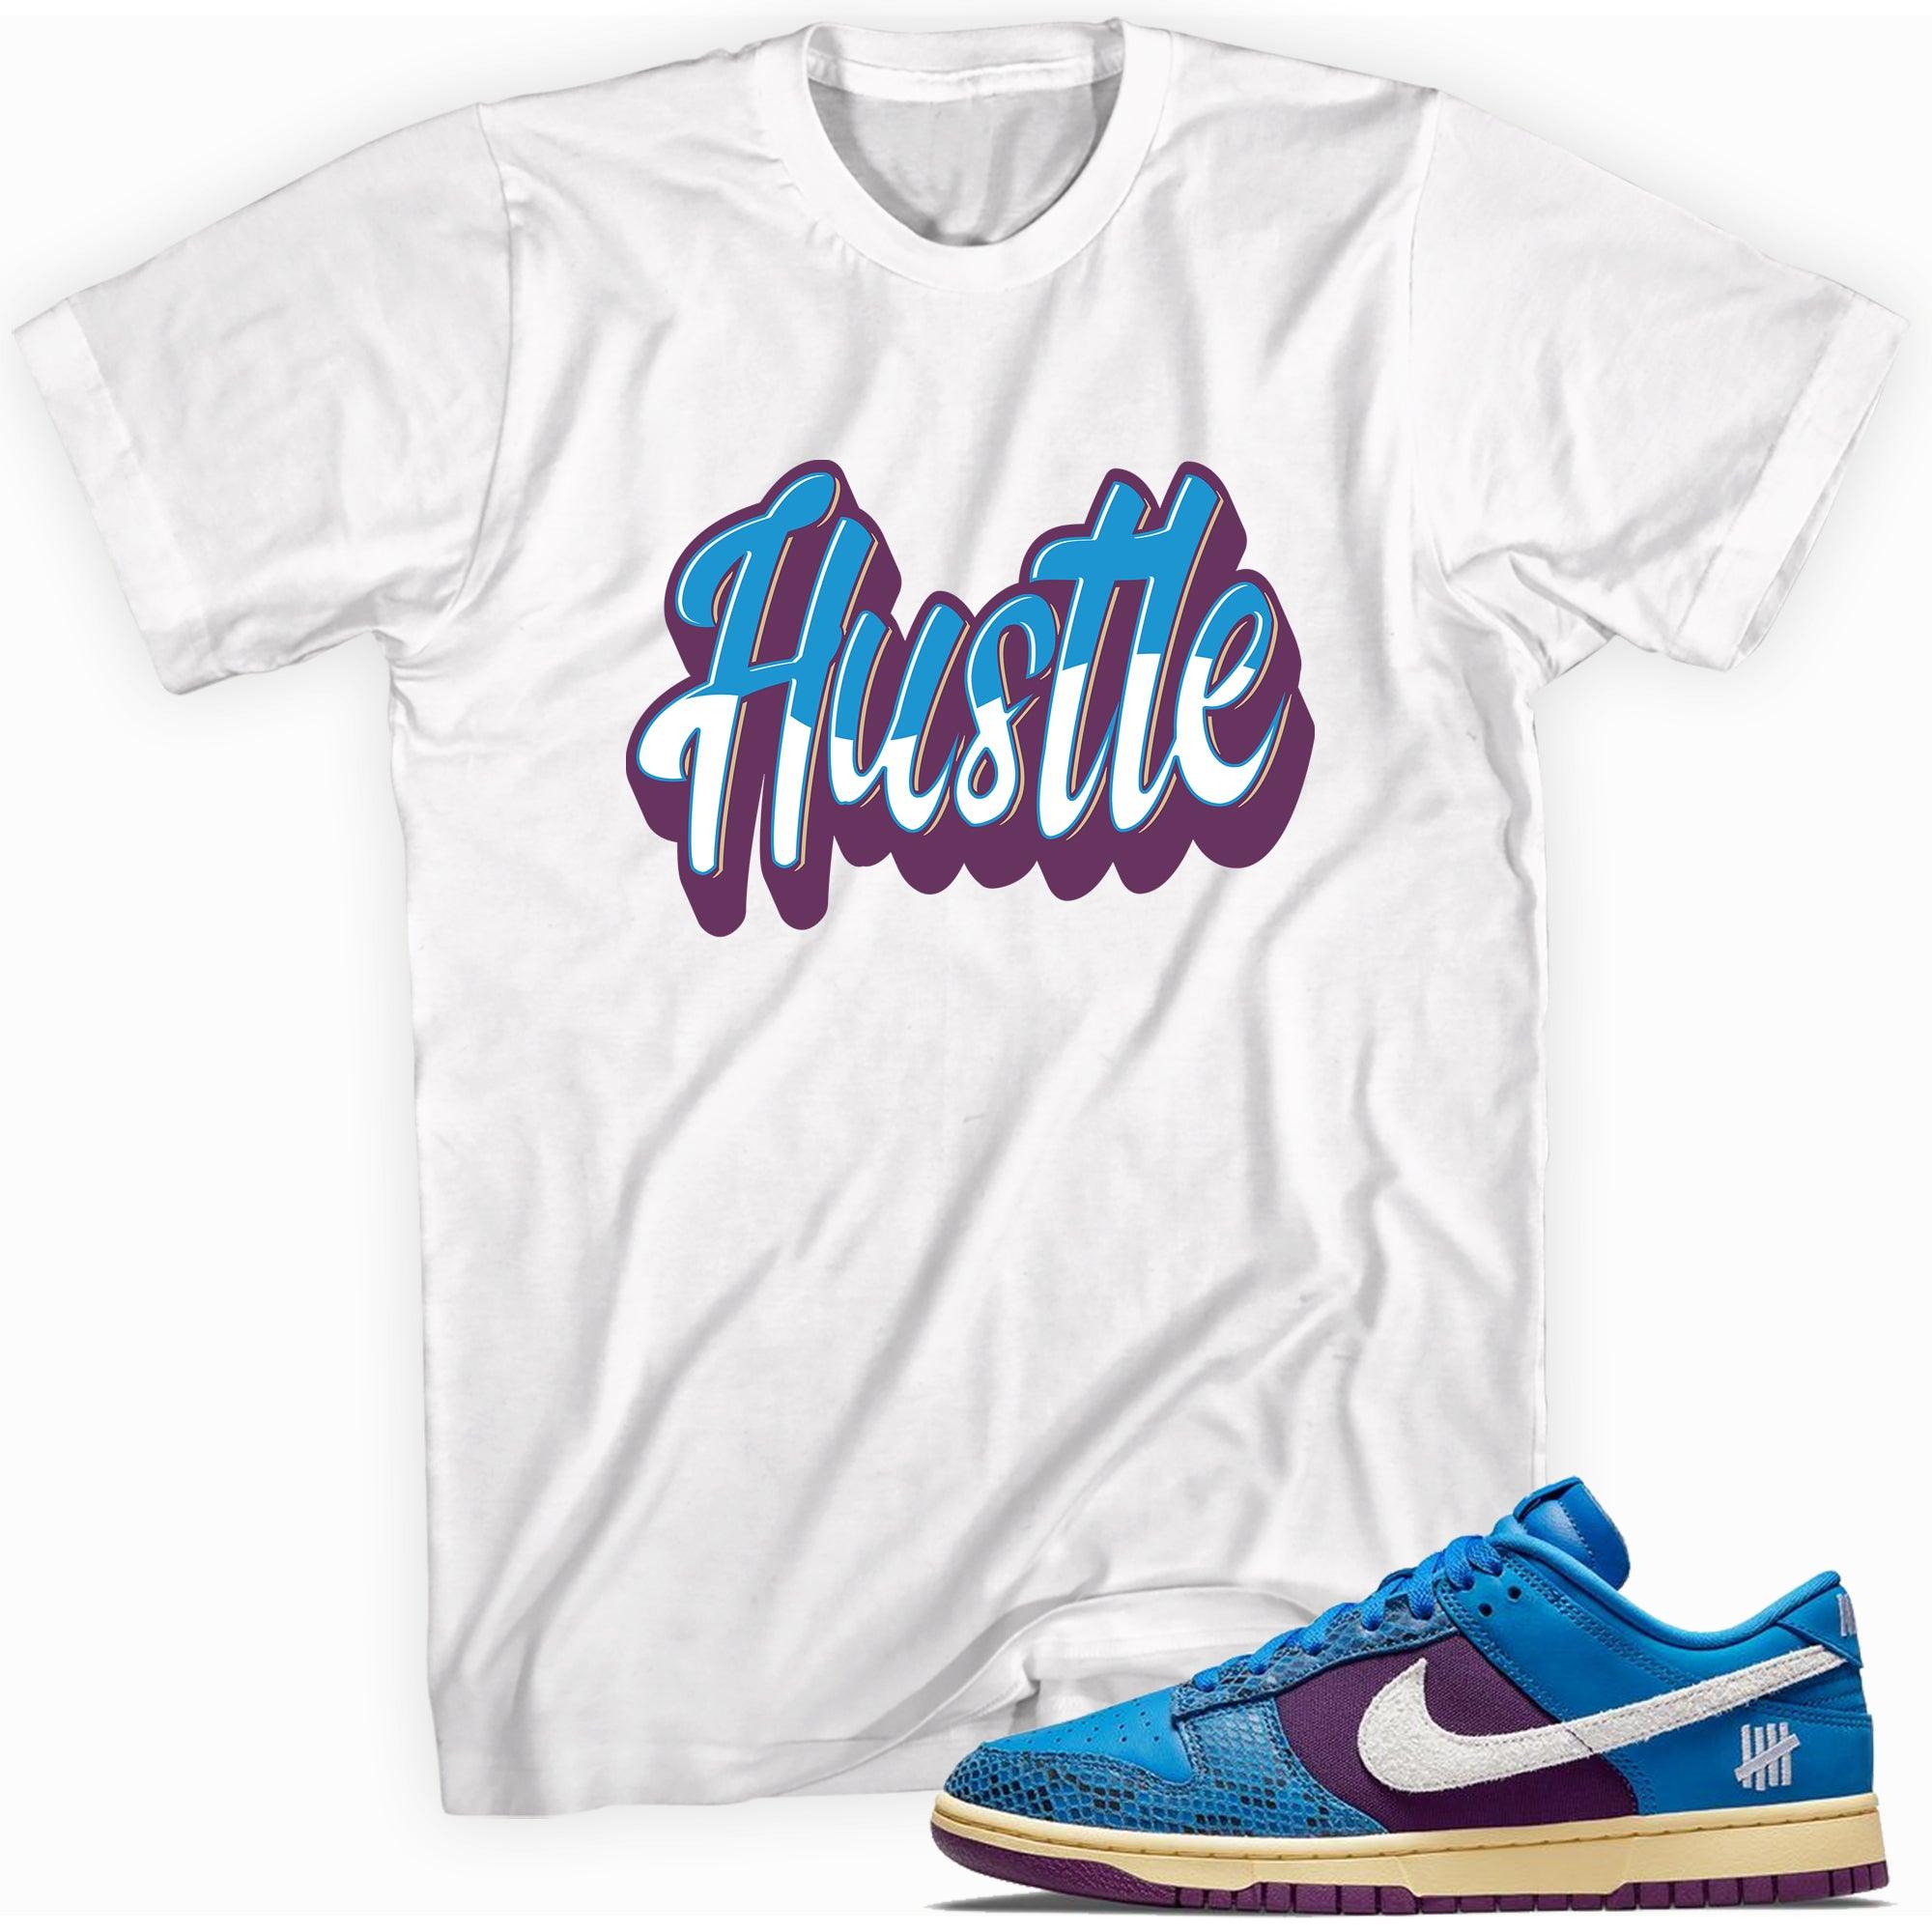 Hustle Shirt Nike Dunks Low Undefeated 5 On It Dunk vs AF1 photo